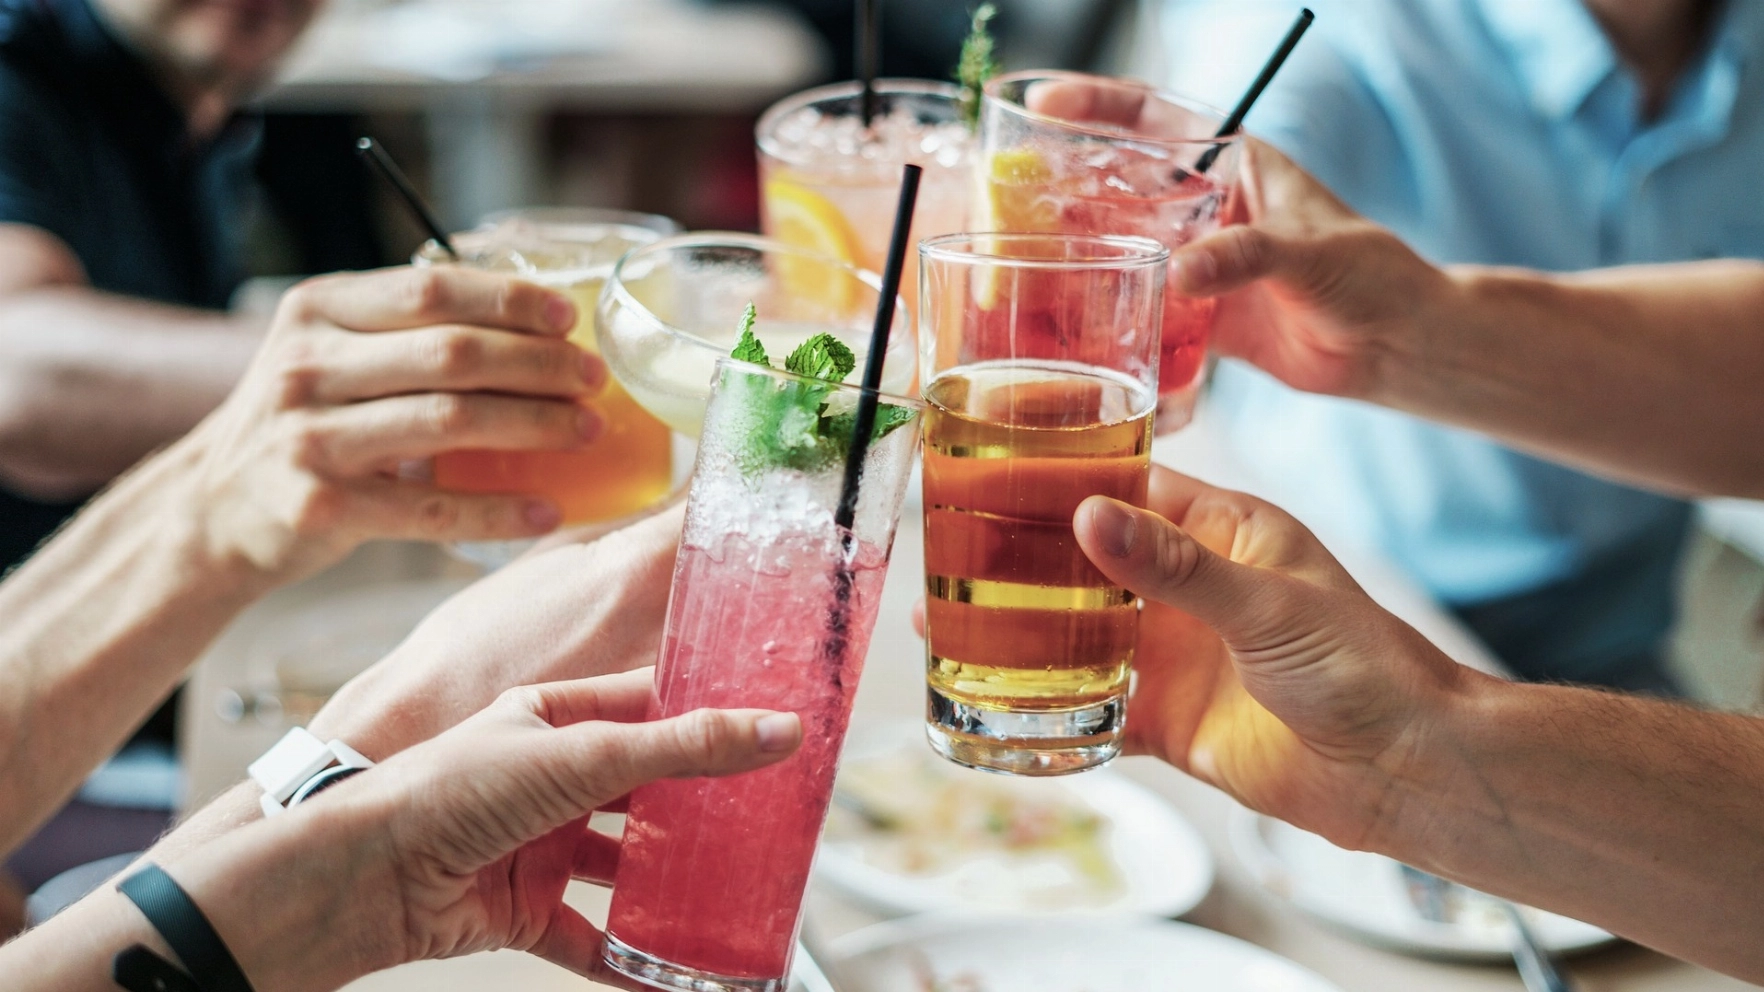 Alcohol Consumption Vs. Health - What Do You Think?